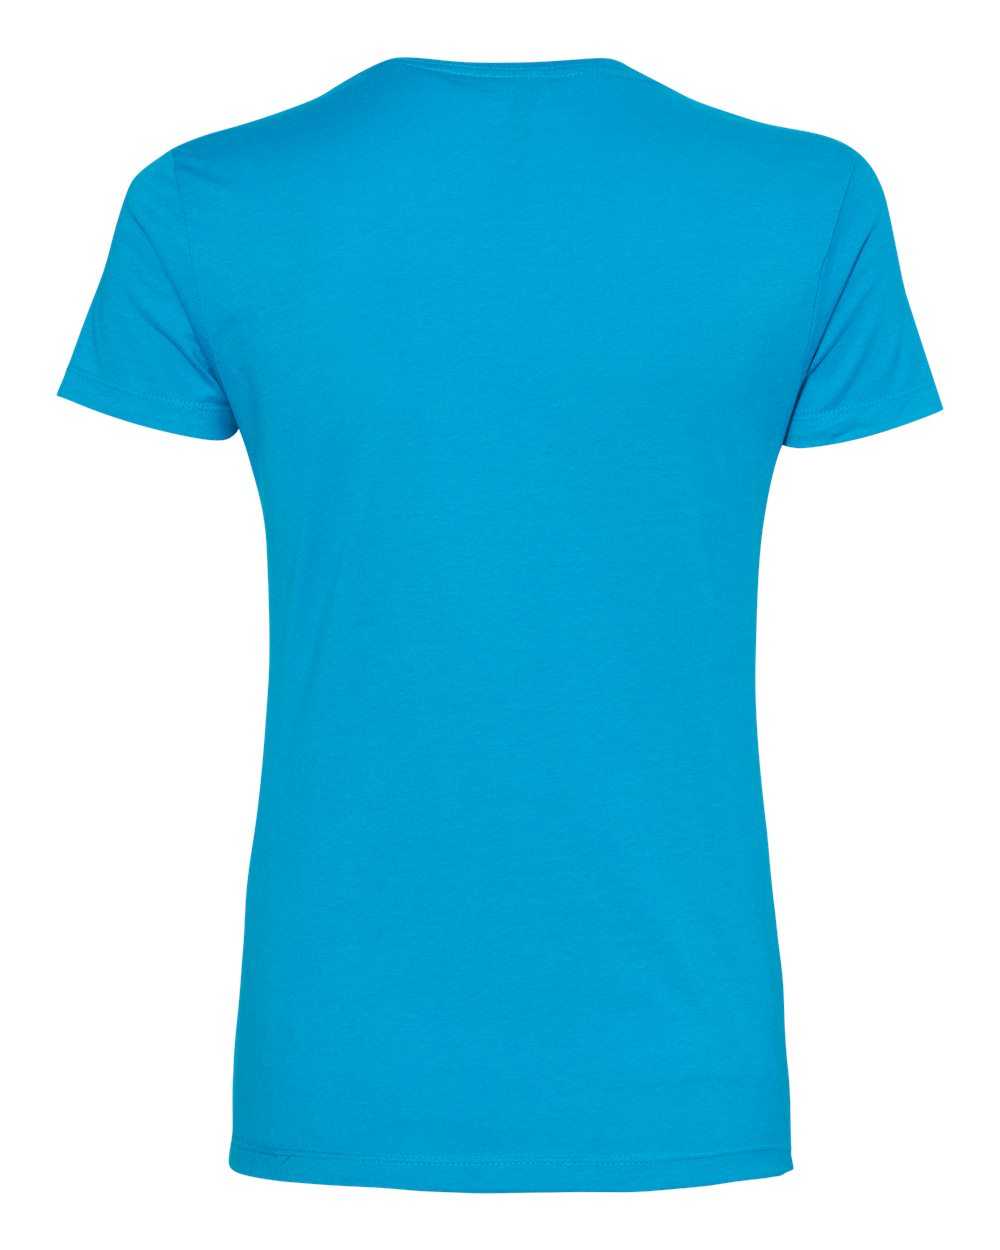 Alstyle 2562 Ultimate Missy Tee - Turquoise - HIT a Double